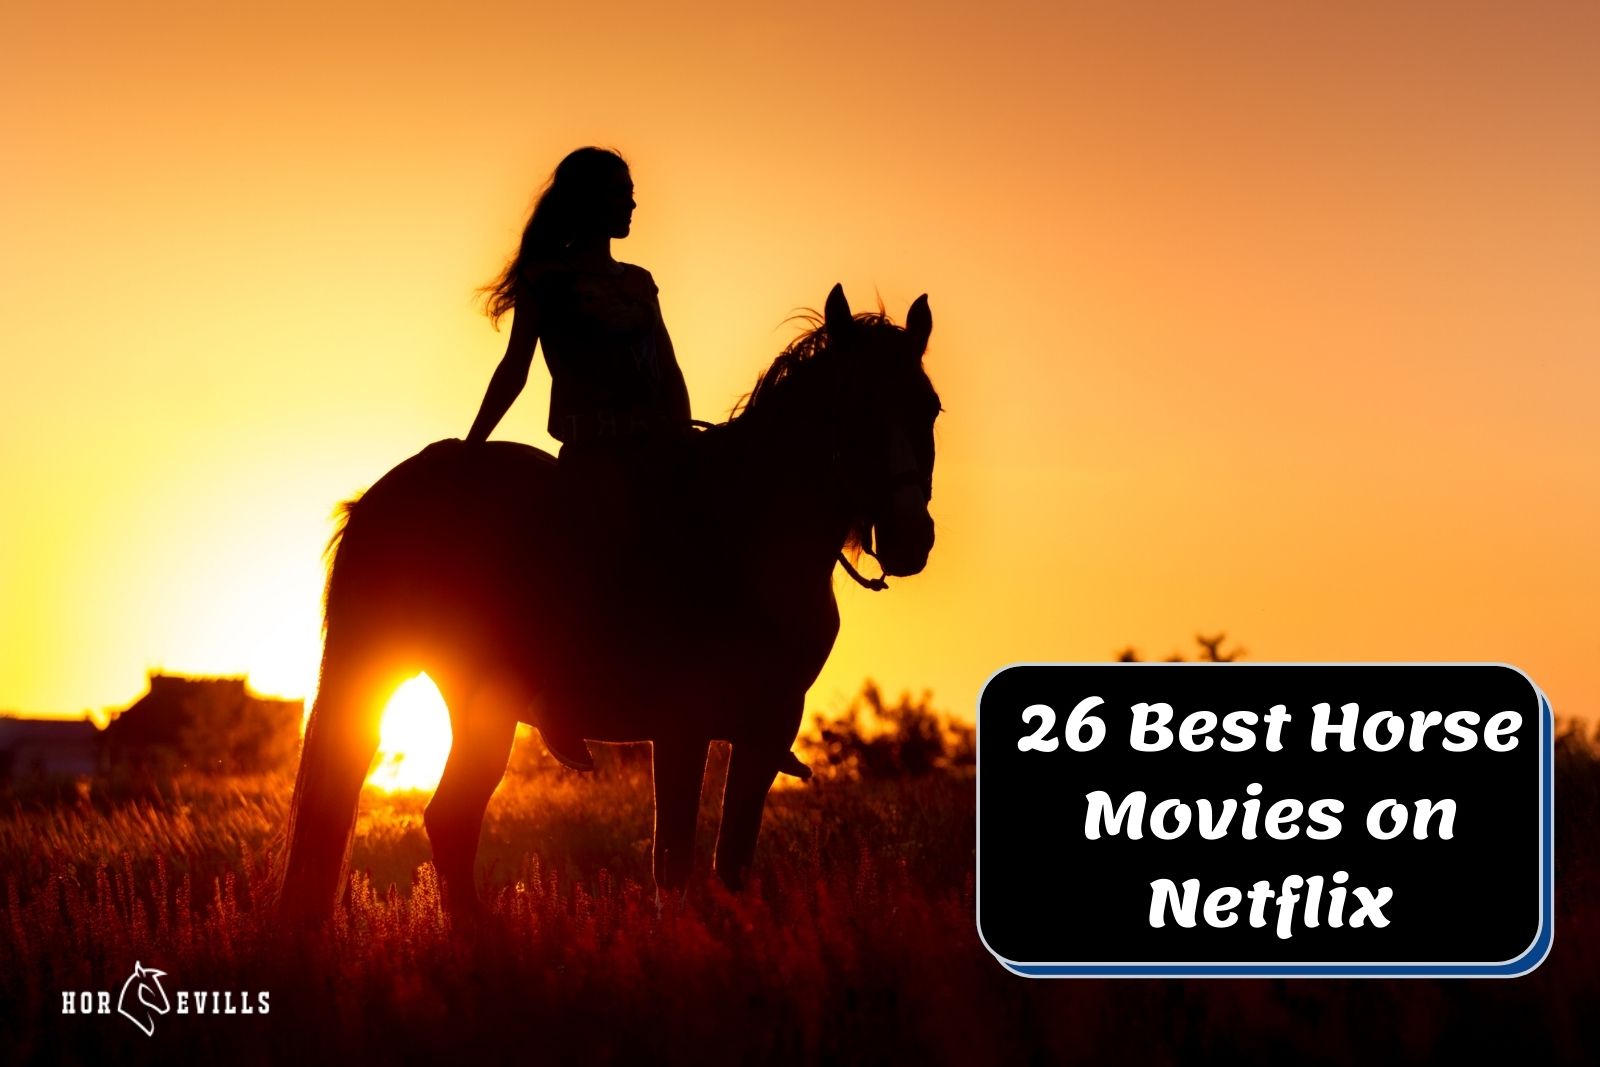 girl riding on a horse with a sunset background for the best horse movies on netflix